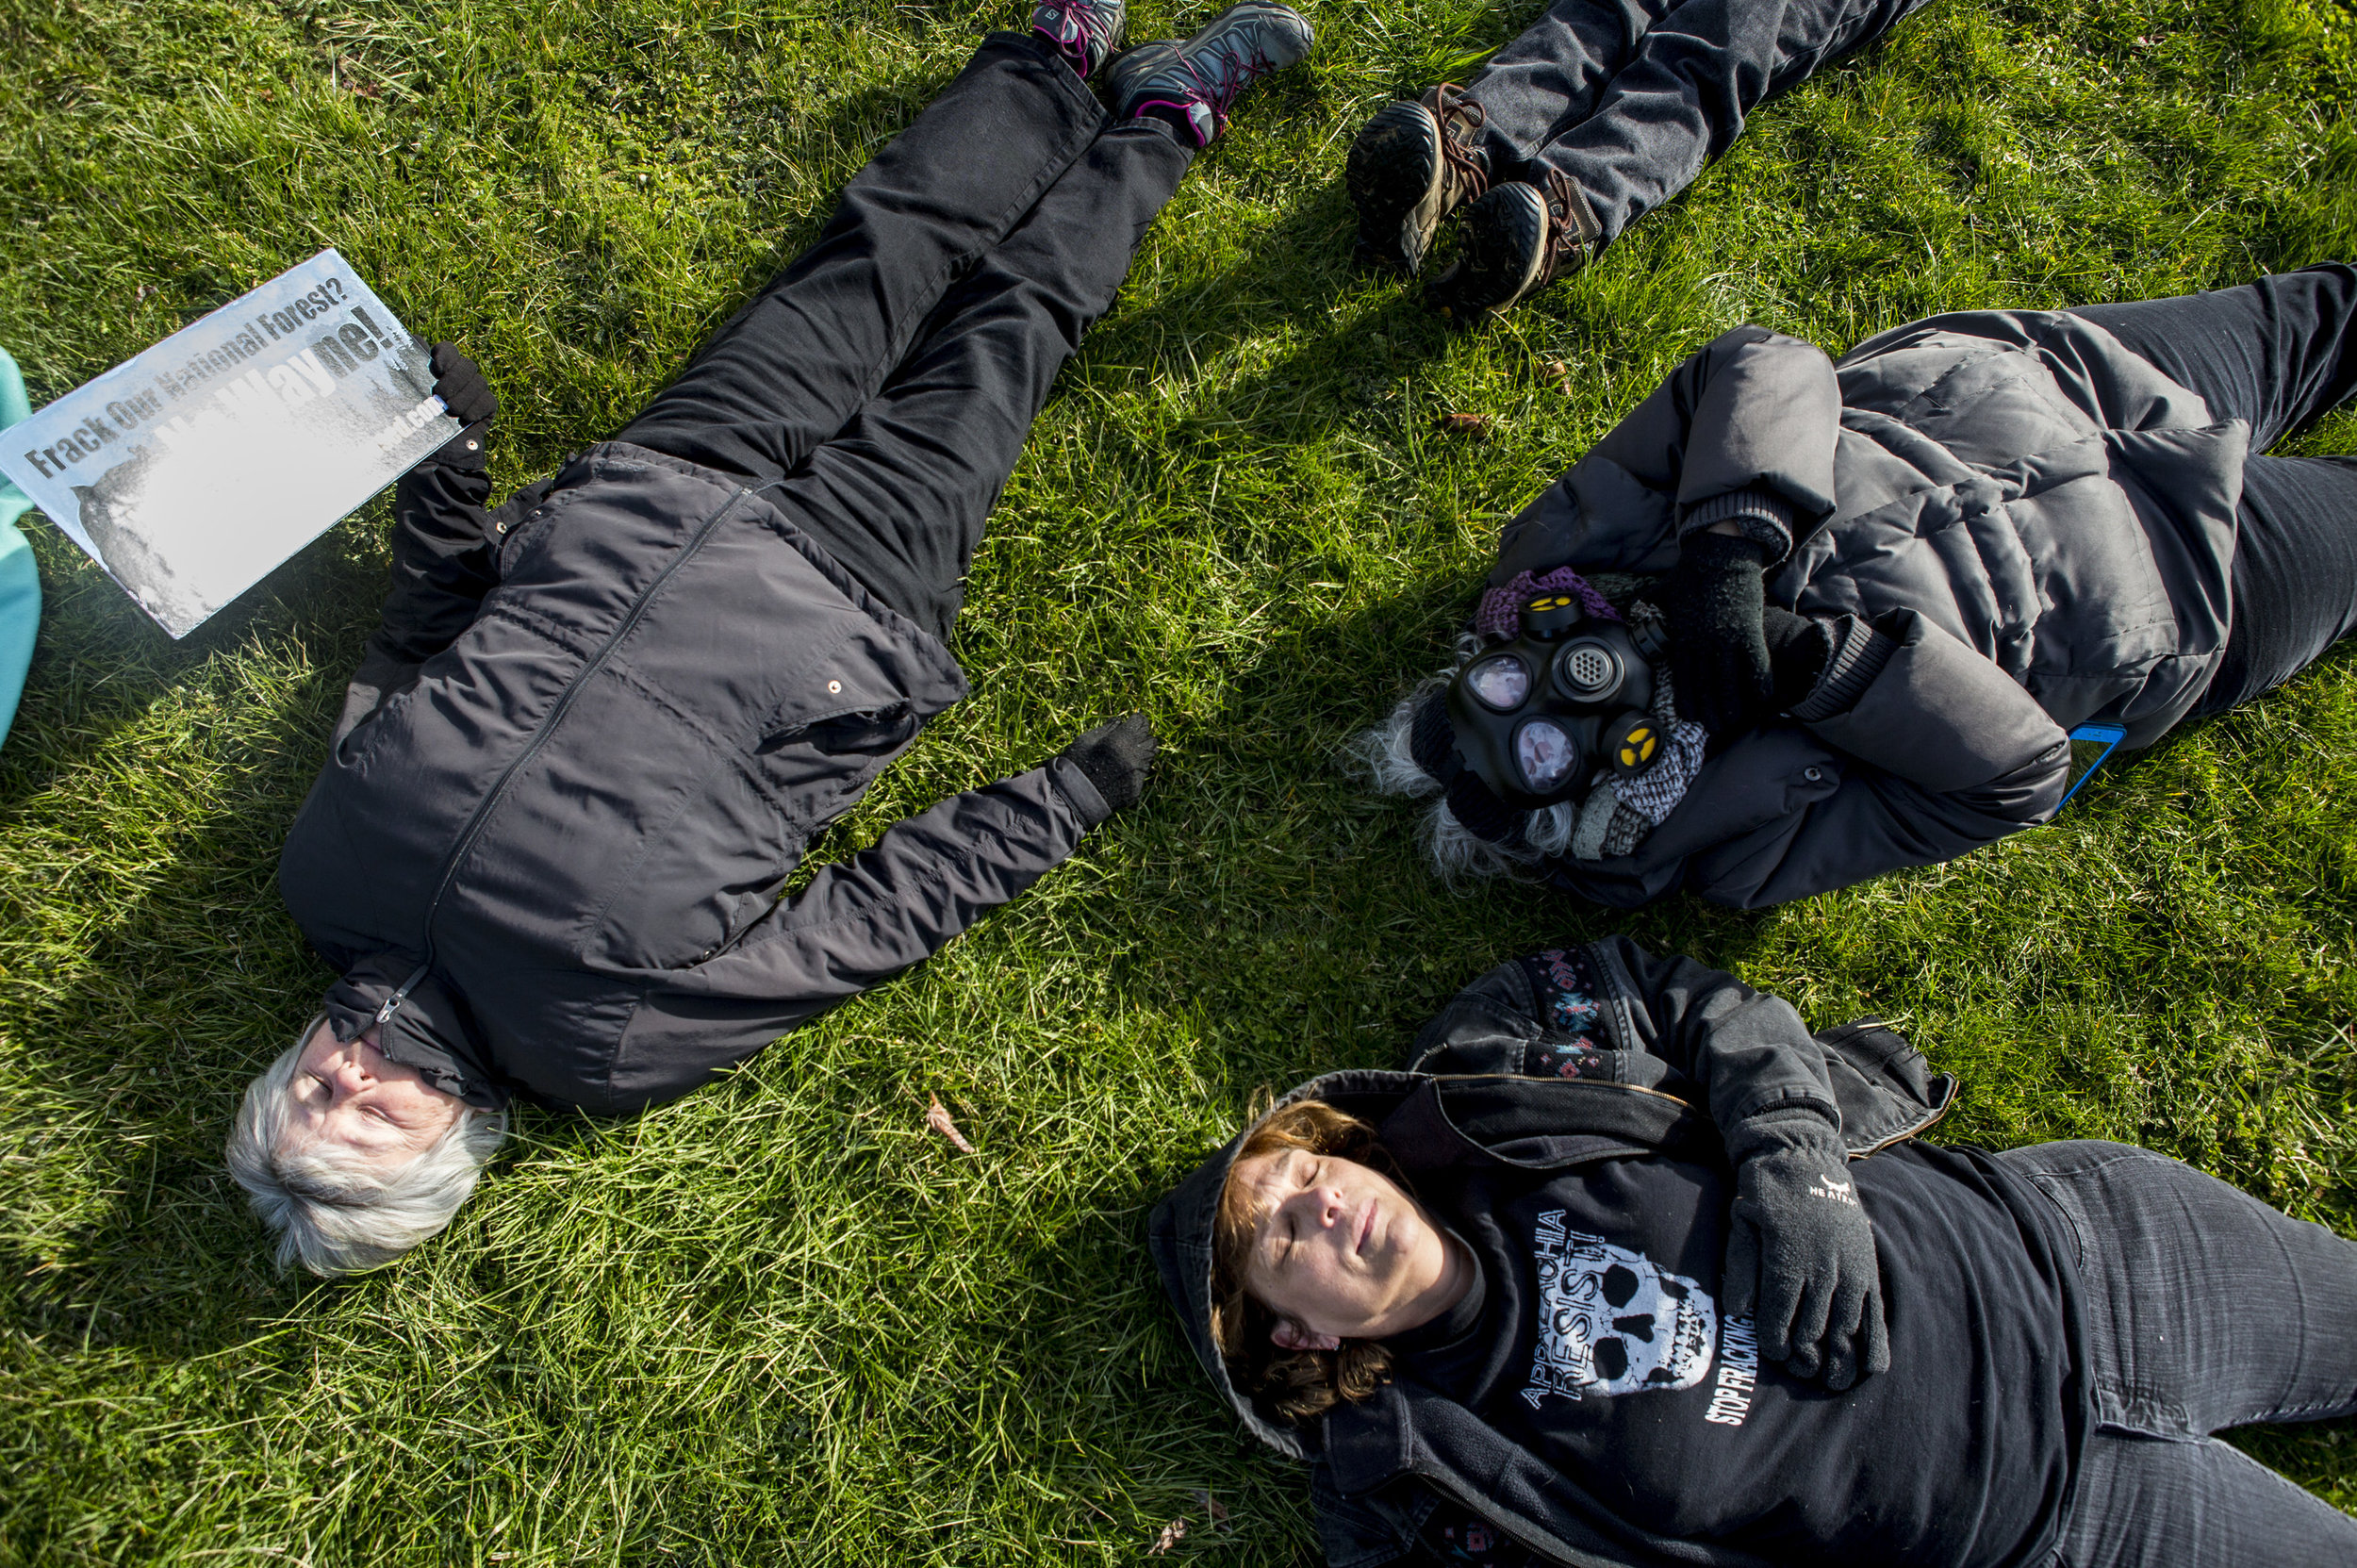  Protesters lay outside of the Wayne National Forest Headquarters during a "die-in" to demonstrate against the auction of Wayne land for fracking along Route 33 in Athens County, Ohio, on March 23, 2017. 